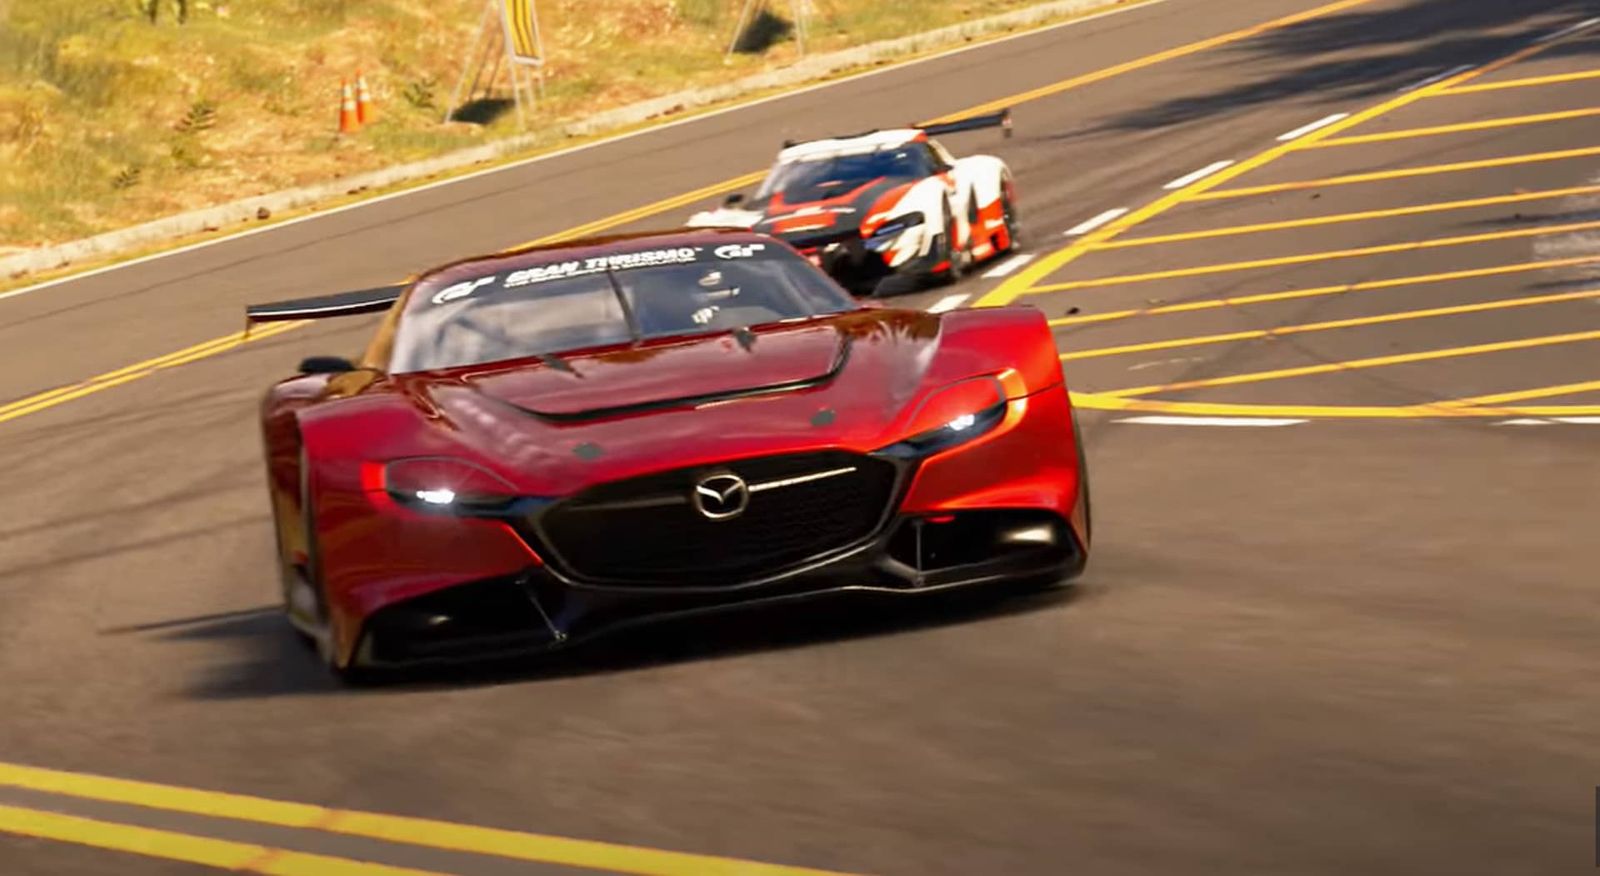 STILL WAITING: GT7 has been delayed into 2022